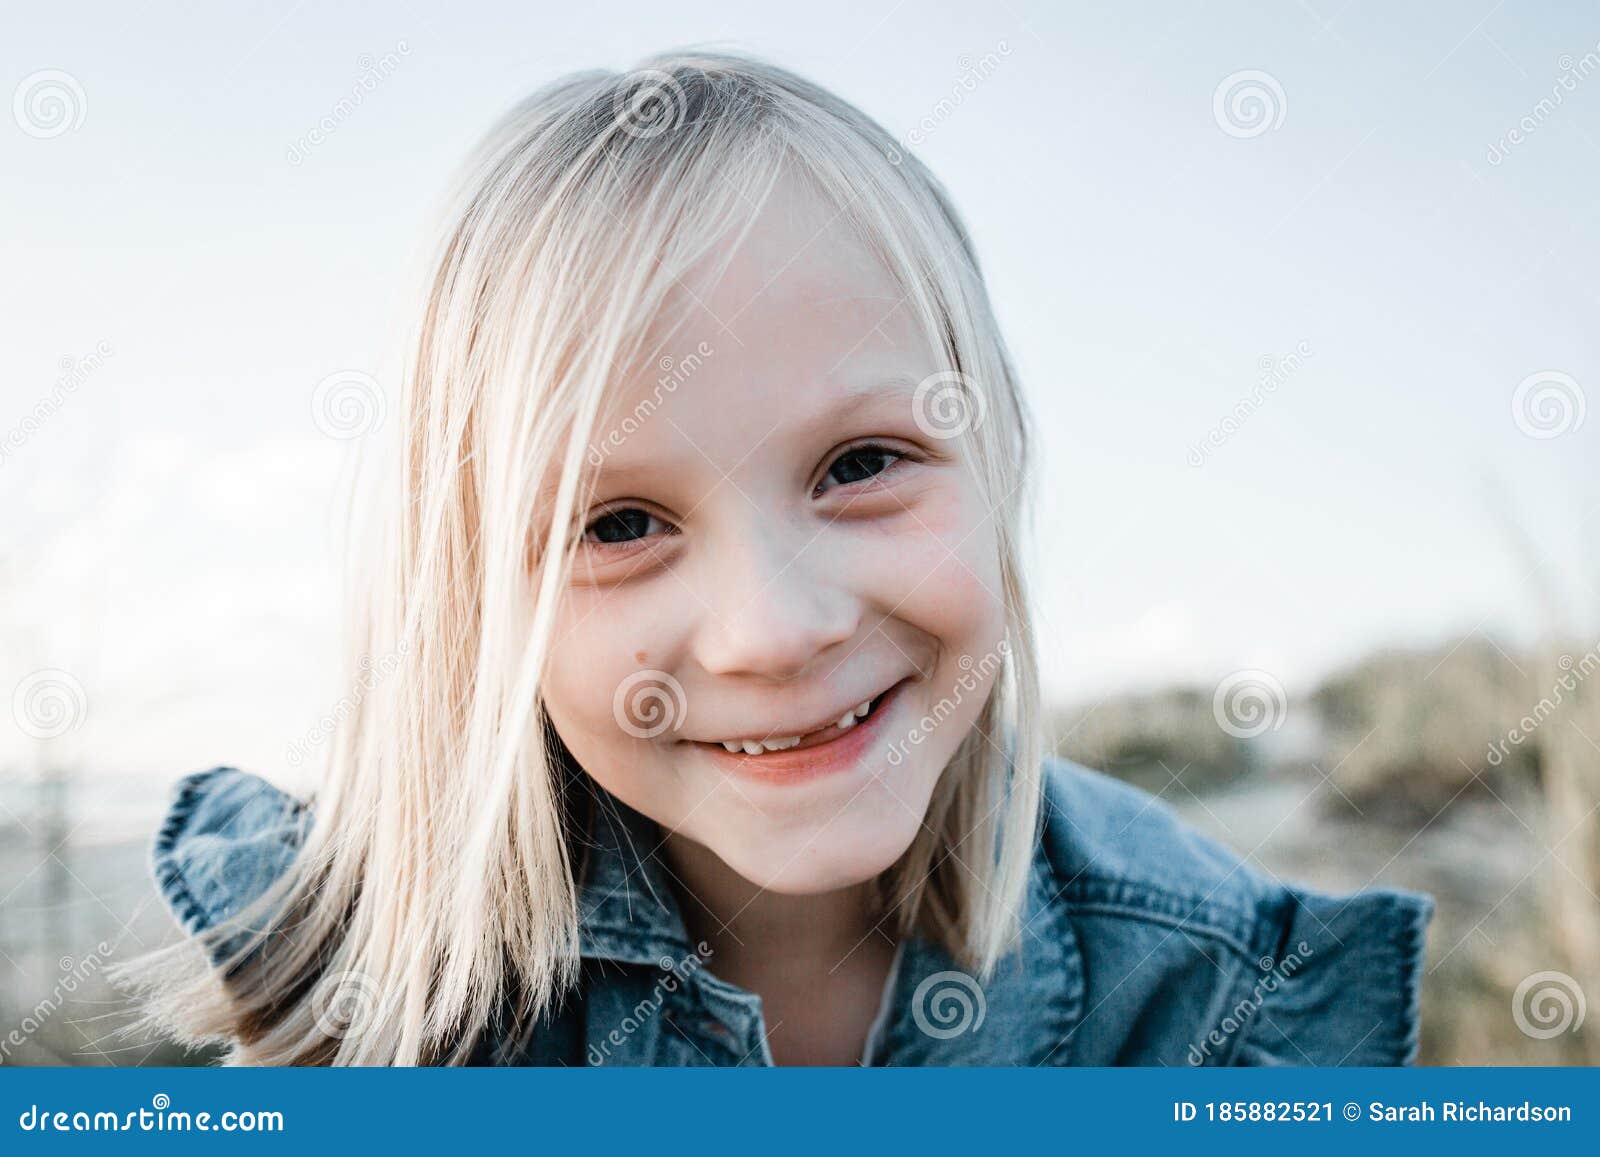 Young Girl Looking at the Camera Stock Image - Image of female ...